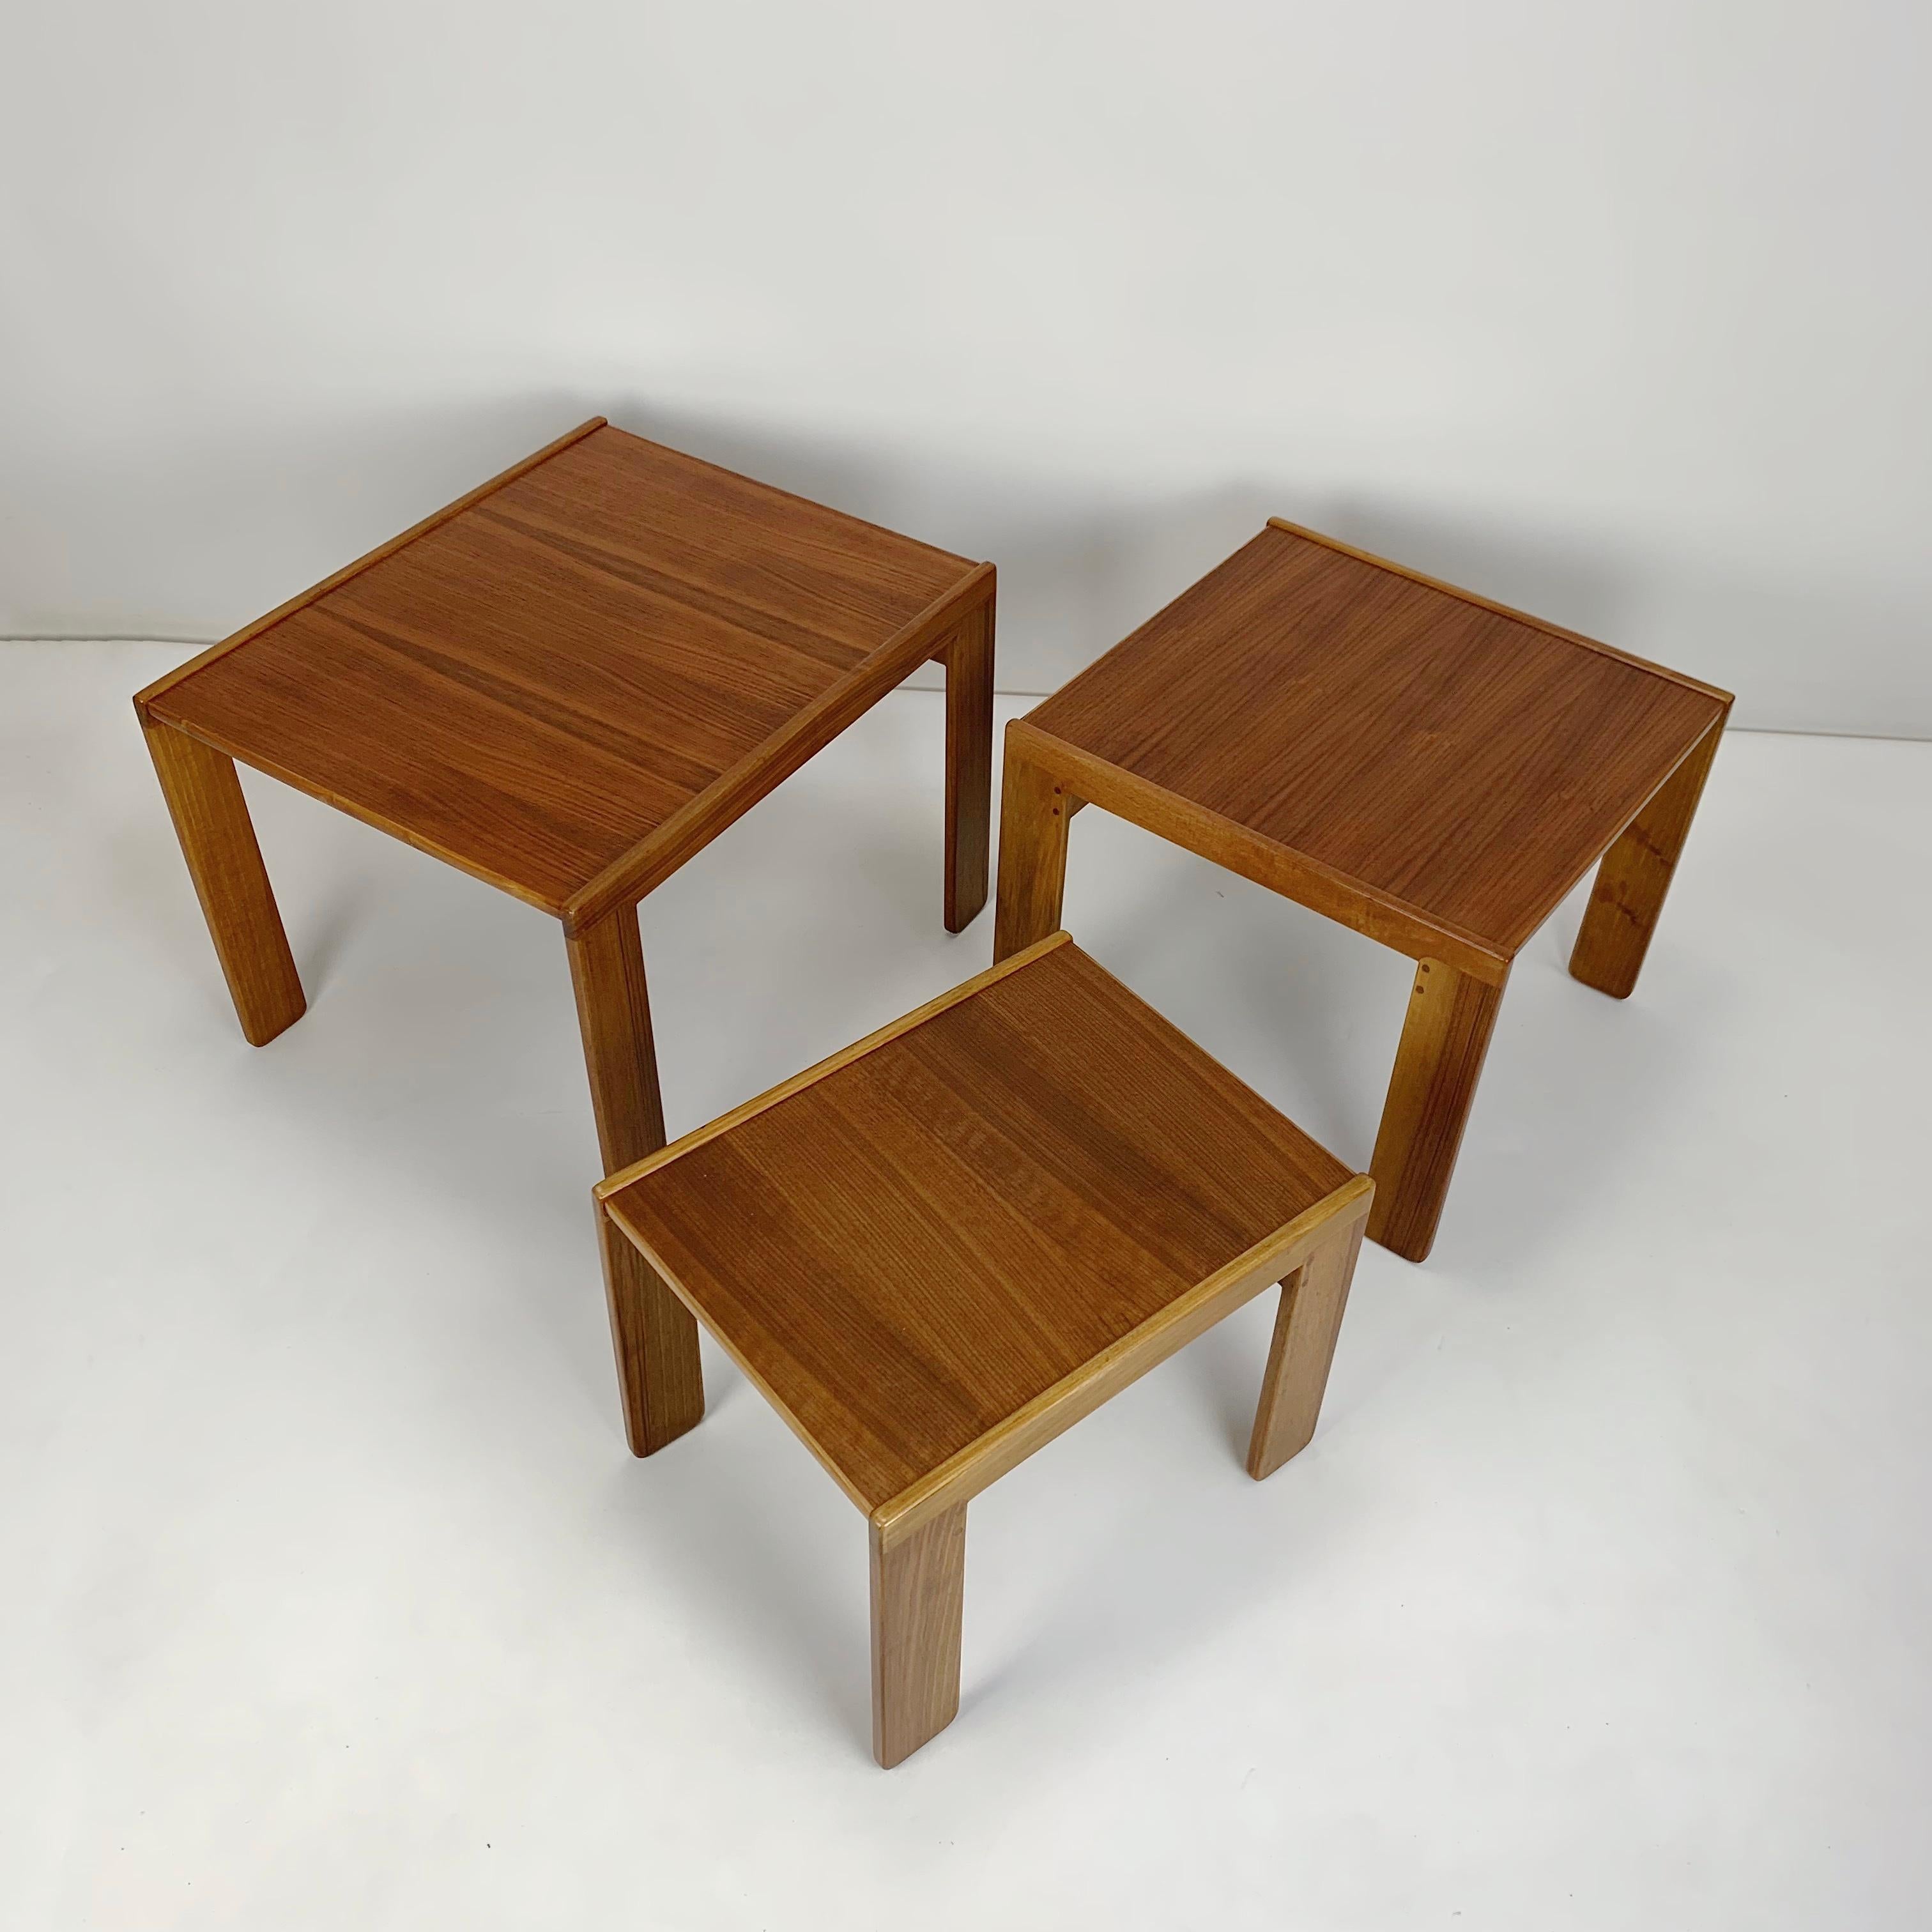 Mid-20th Century Scarpa Afra & Tobia Nesting Tables 777 Model for Cassina, circa 1960, Italy.